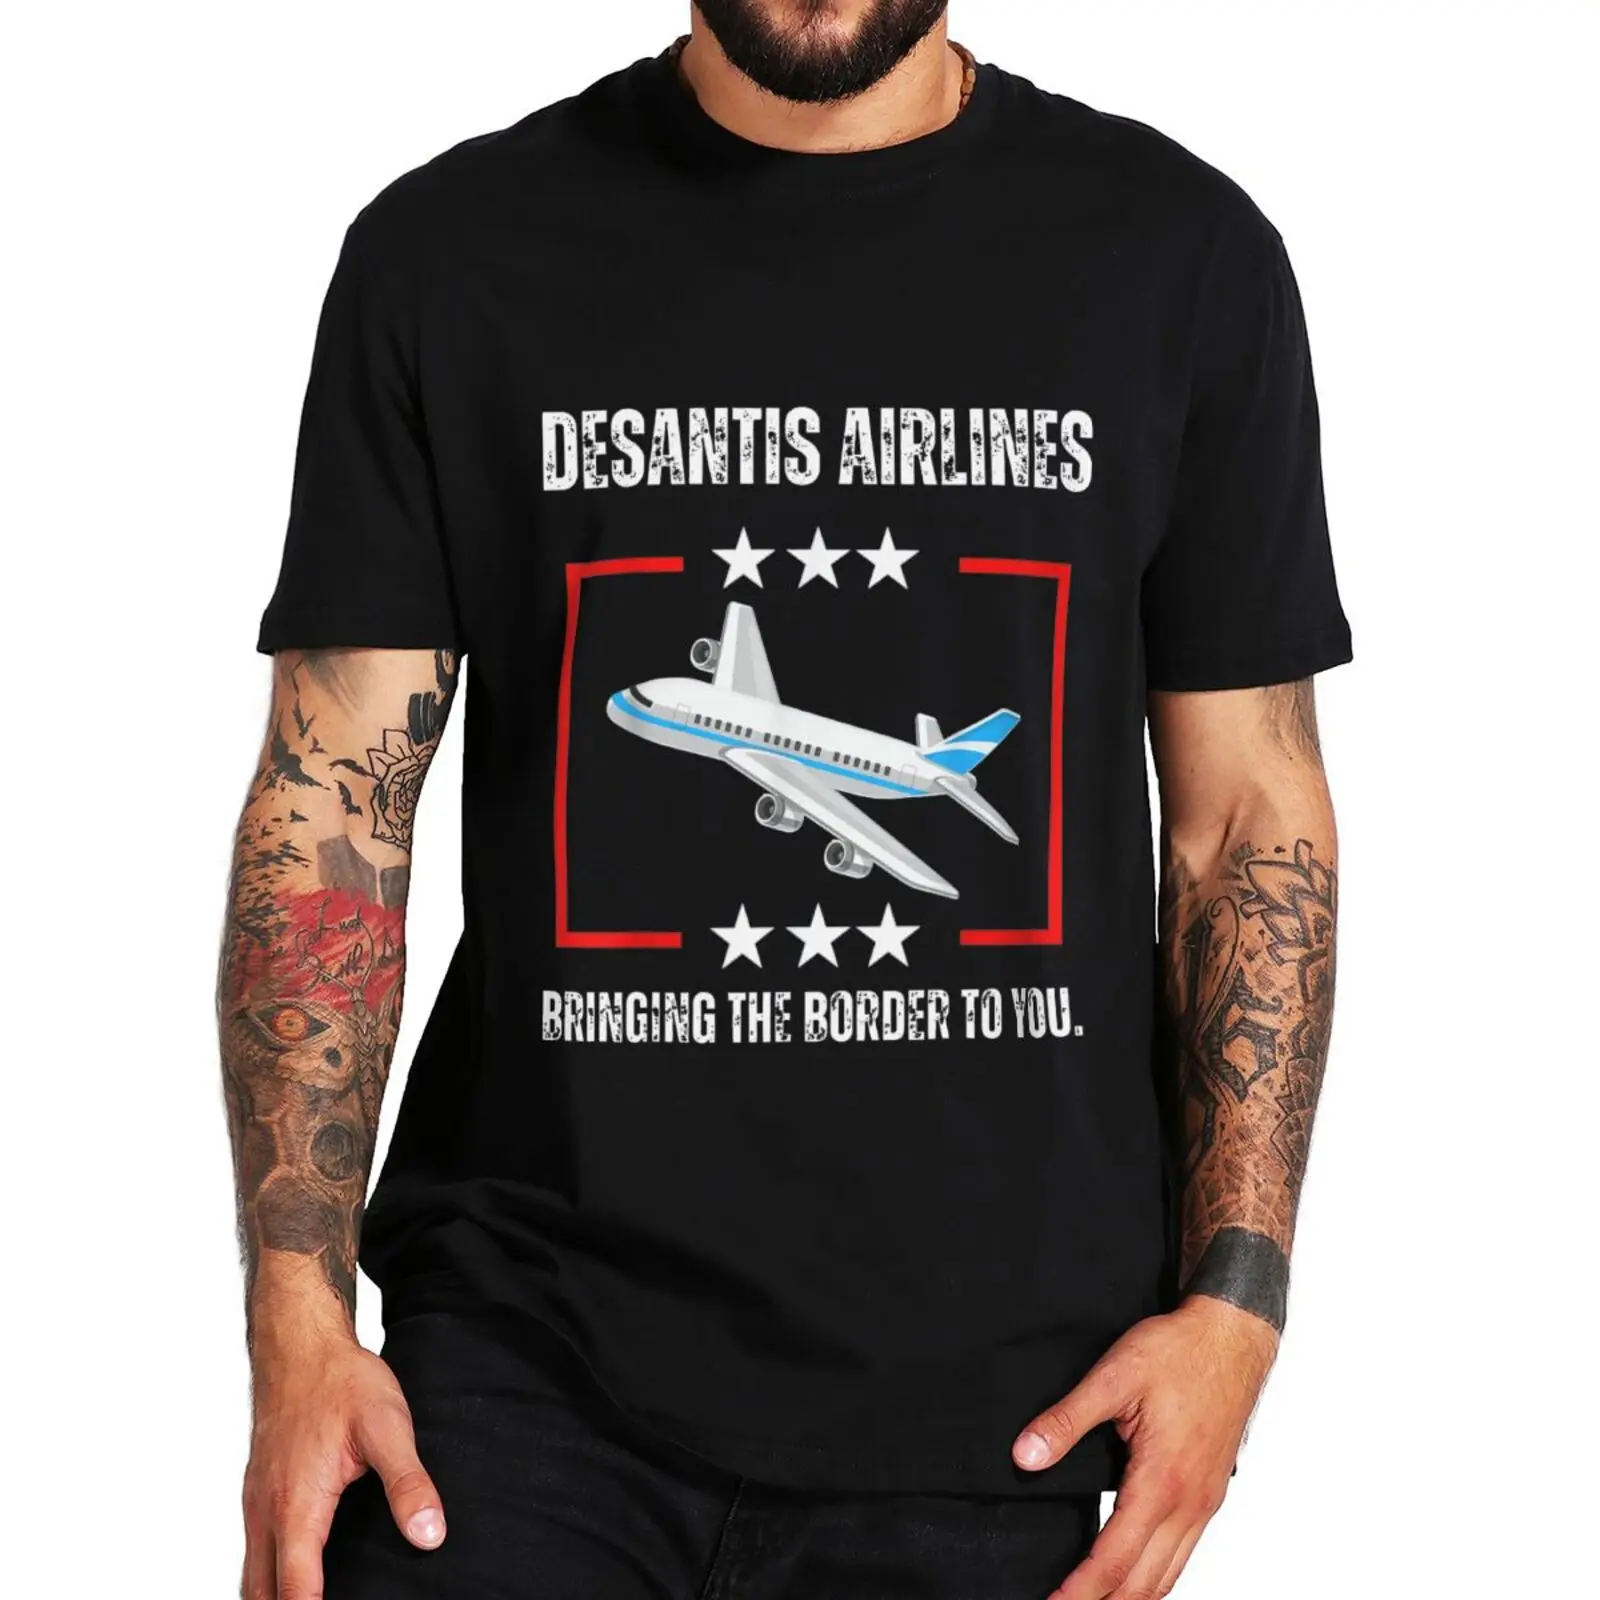 

DeSantis Airlines Bring The To You T-shirt Funny Meme Sarcastic Political Joke Tee Tops Casual Unisex Cotton Soft T Shirts